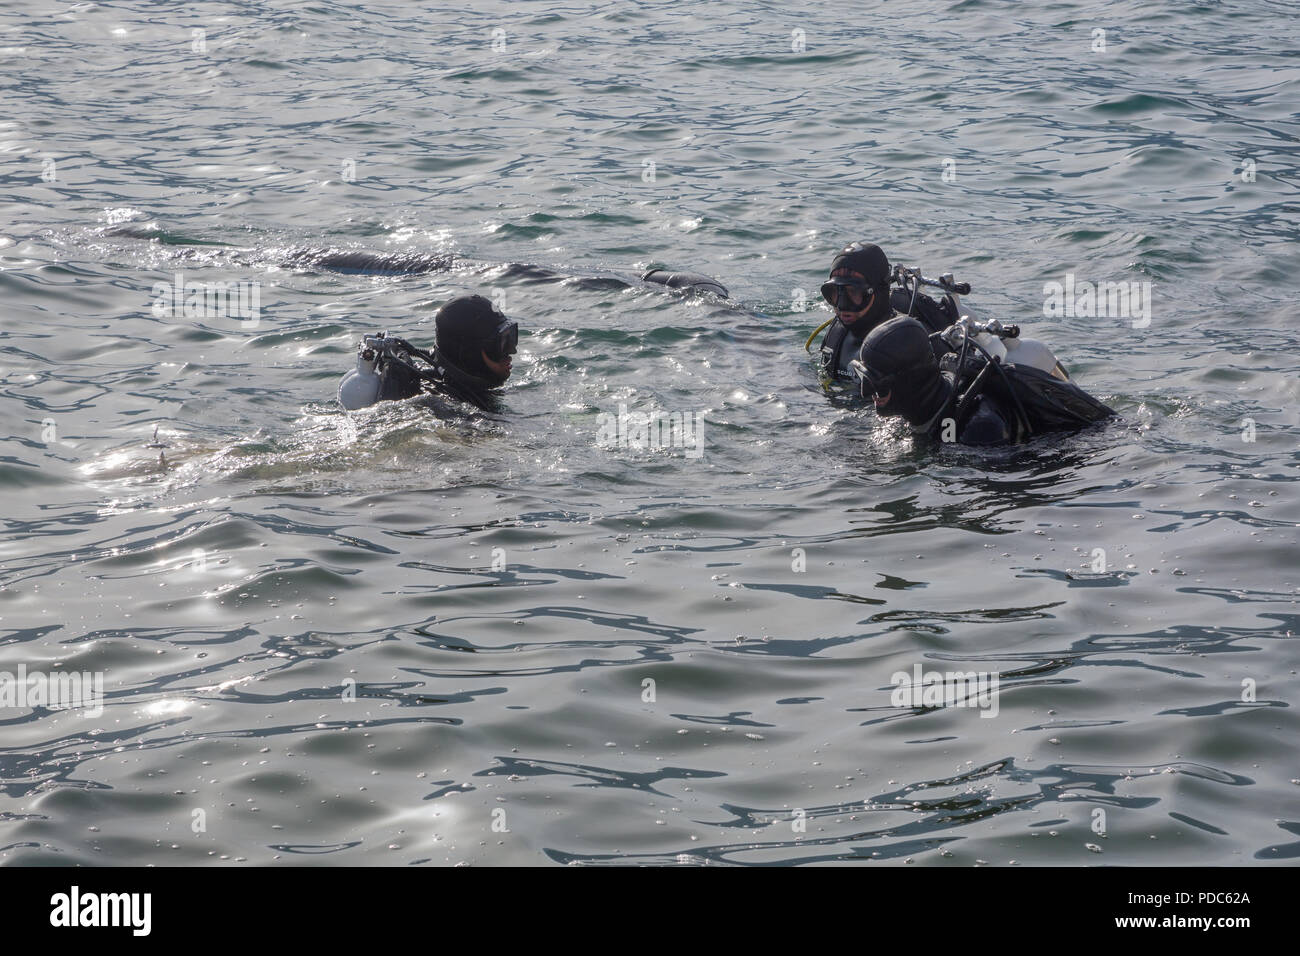 Three (3) male sub-aqua divers in black wetsuits with oxygen bottles swimming in sea with gentle surface waves in the Bay of Kotor, Perast, Montenegro Stock Photo